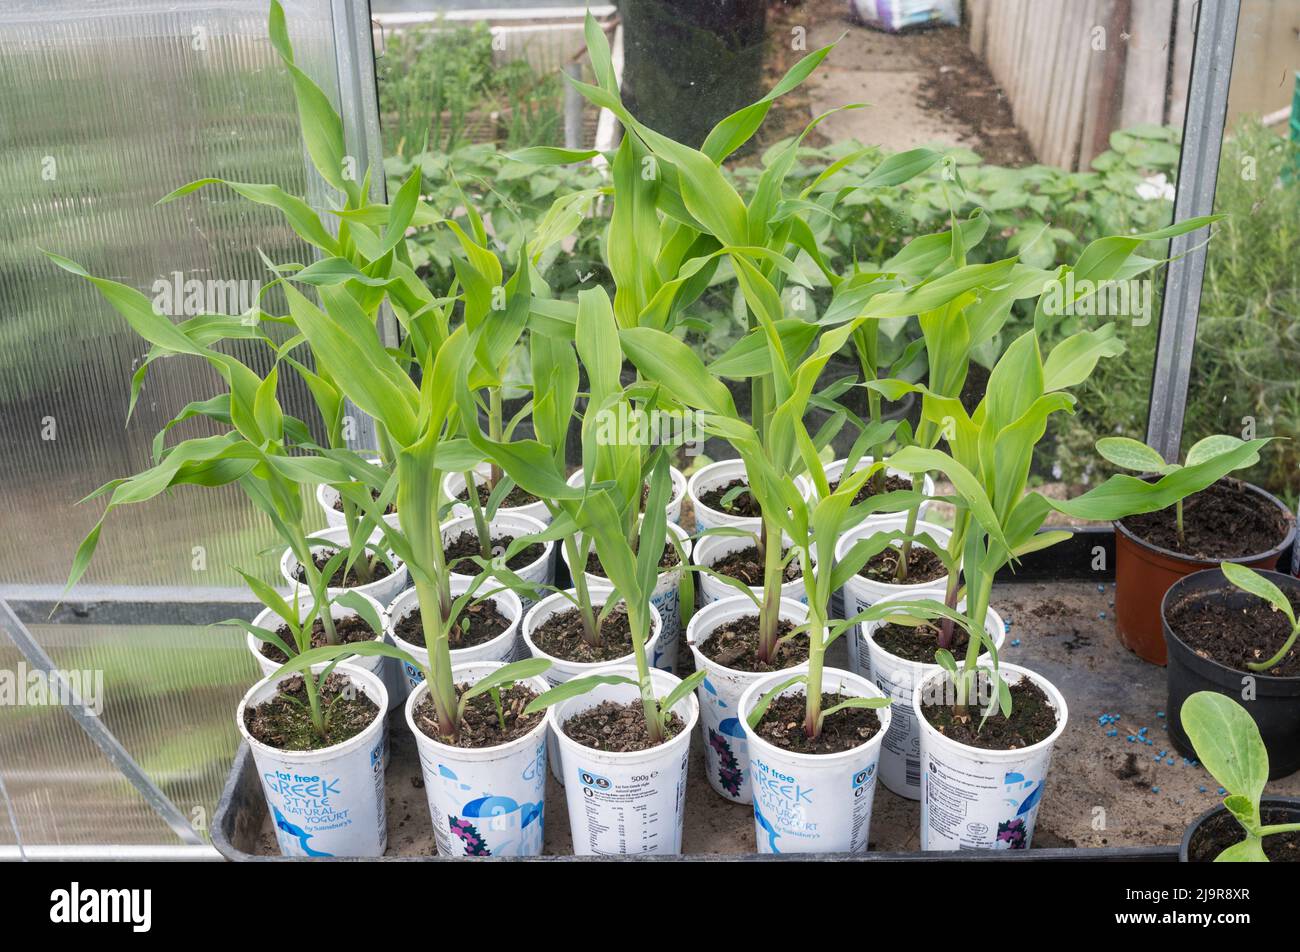 Sweetcorn seedlings variety Earliking F1 planted in recycled plastic yoghurt pots within a greenhouse in England, UK Stock Photo